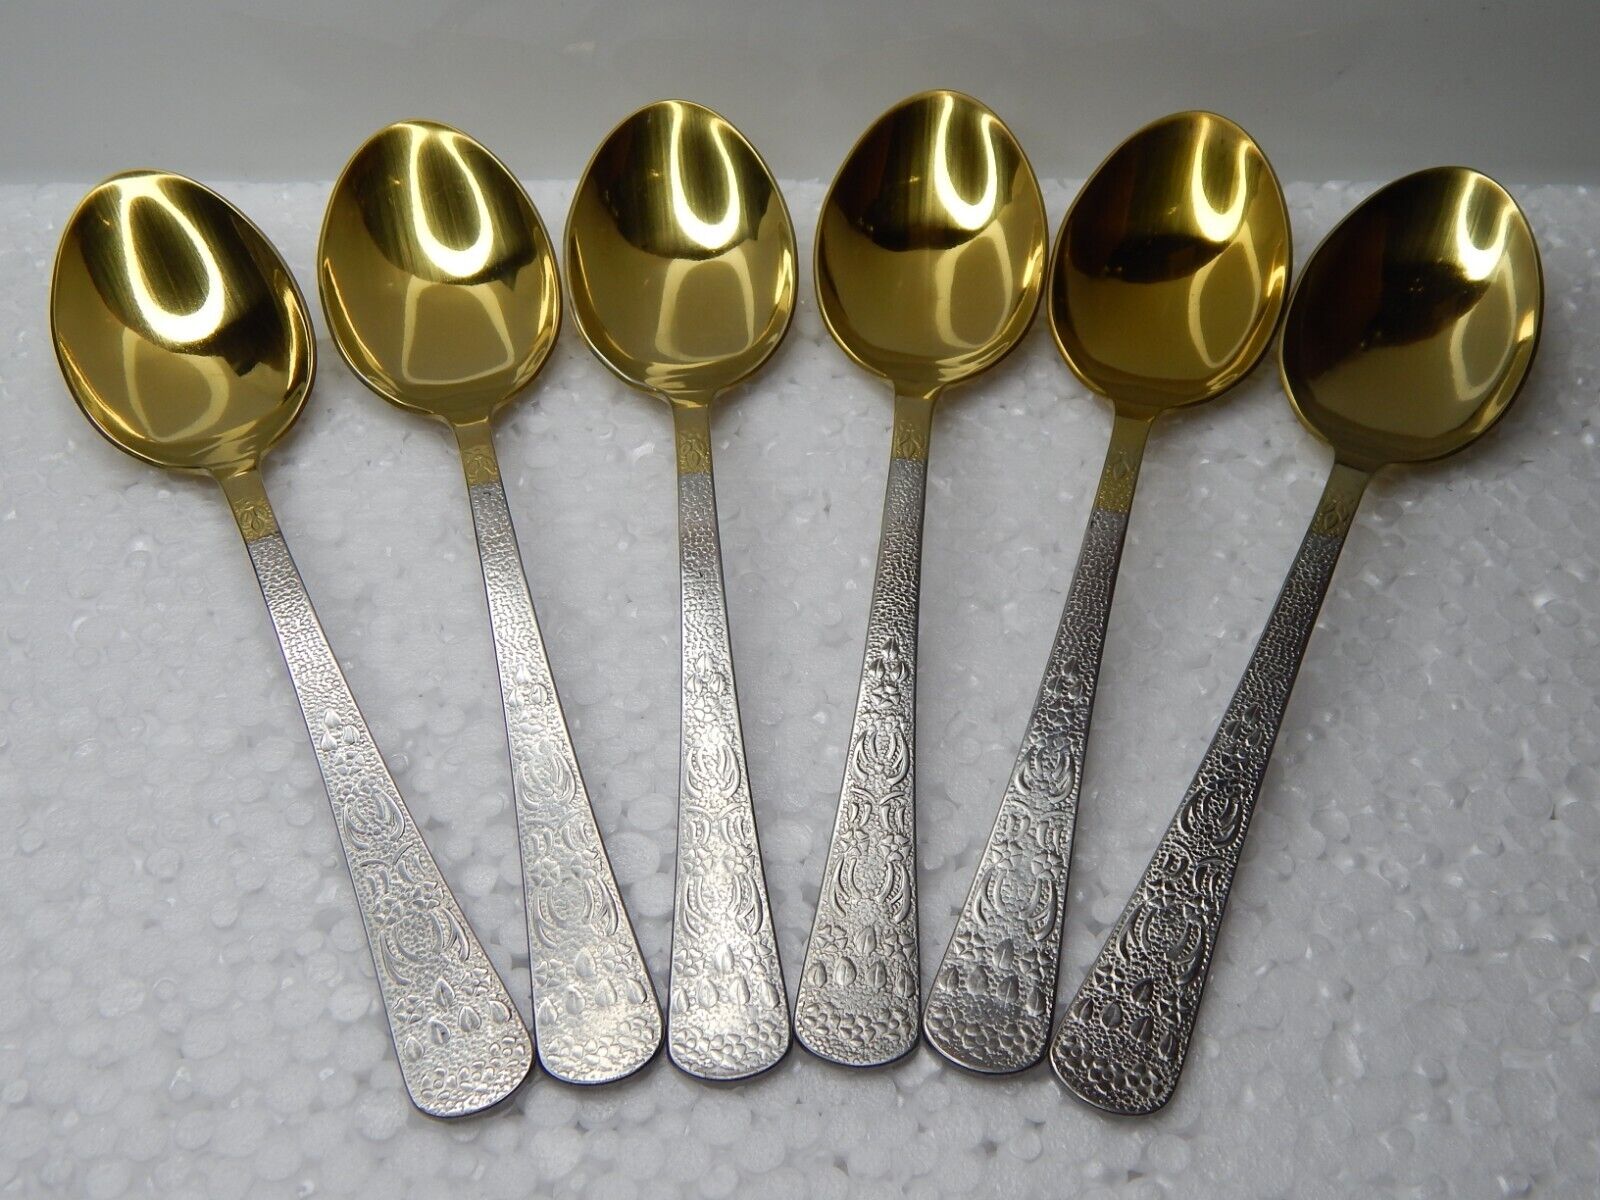 Vintage Gold Plated Table Spoons 6 pcs, Soviet USSR Stainless Steel